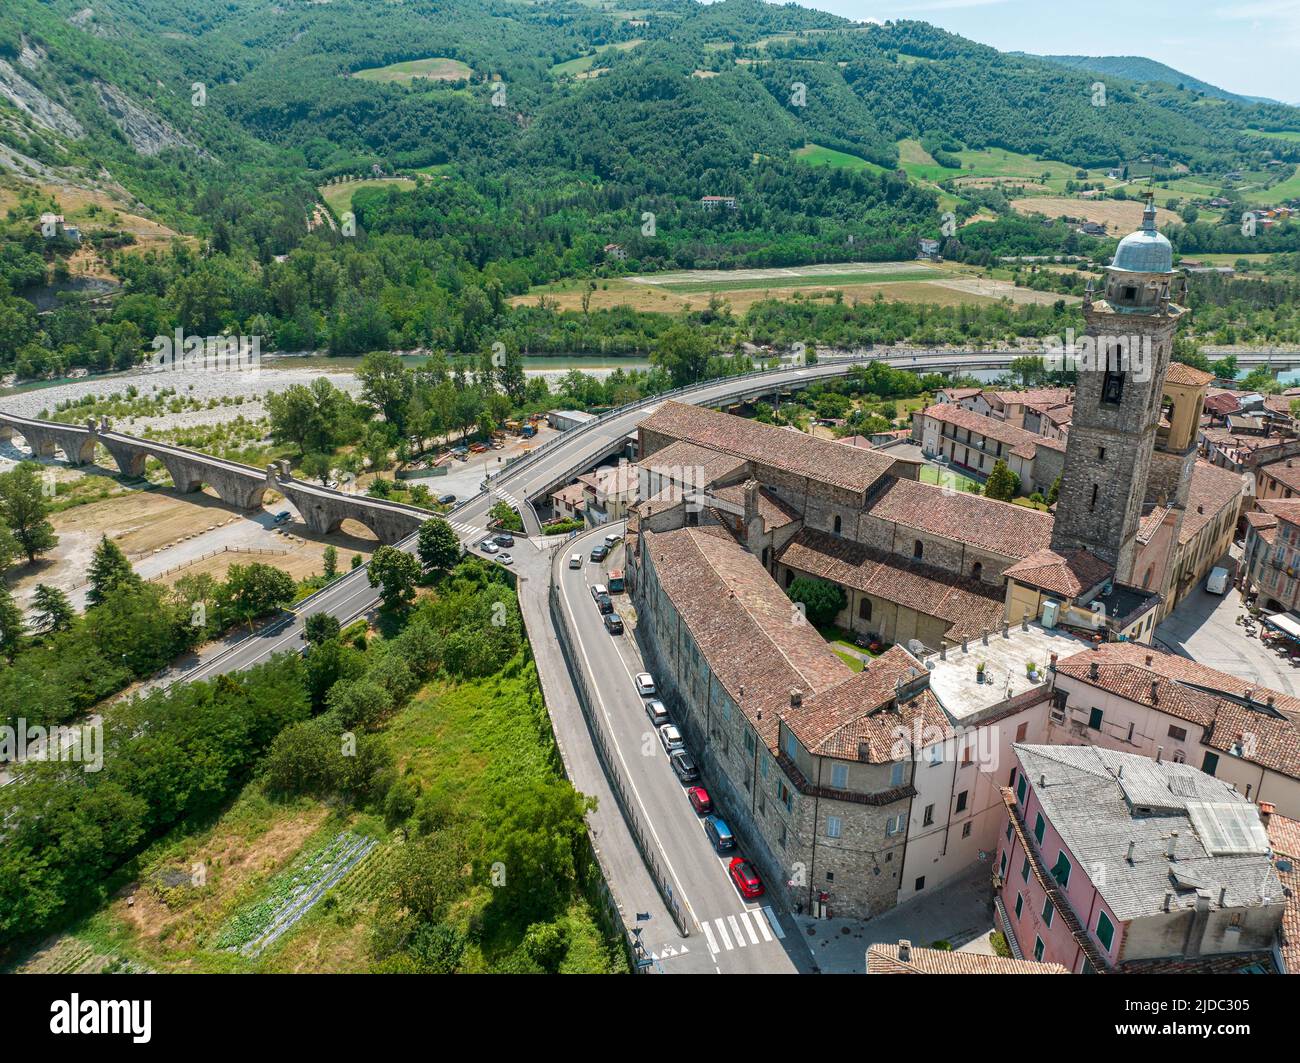 Aerial view of Bobbio, a town on the Trebbia river. Bridge. Piacenza, Emilia-Romagna. Details of the urban complex, roofs and bell towers. Italy Stock Photo